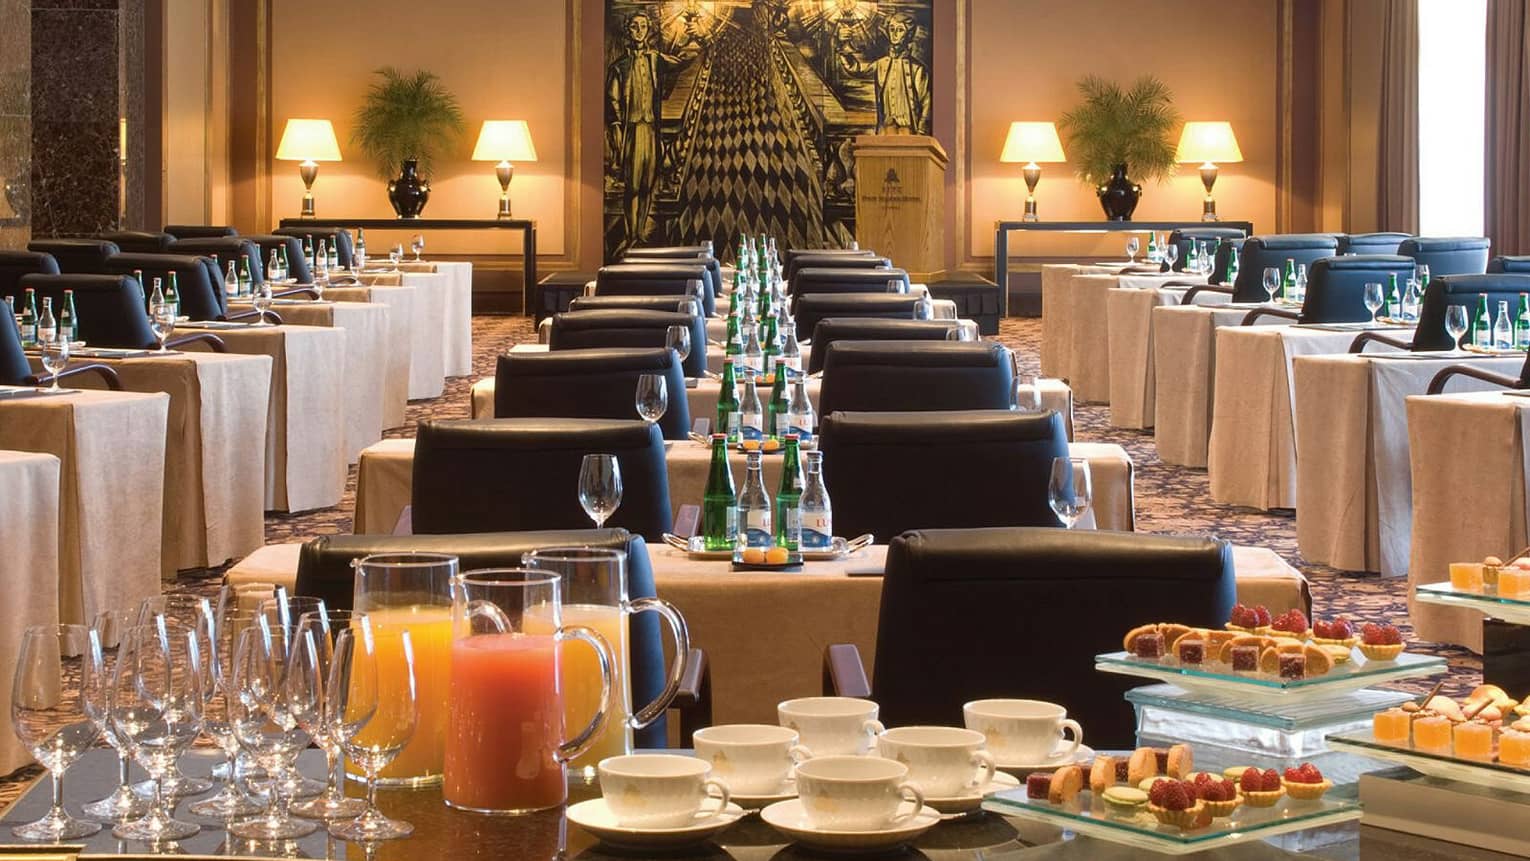 Pessoa Room breakfast buffet with fresh juice, pastries in front of rows of meeting tables